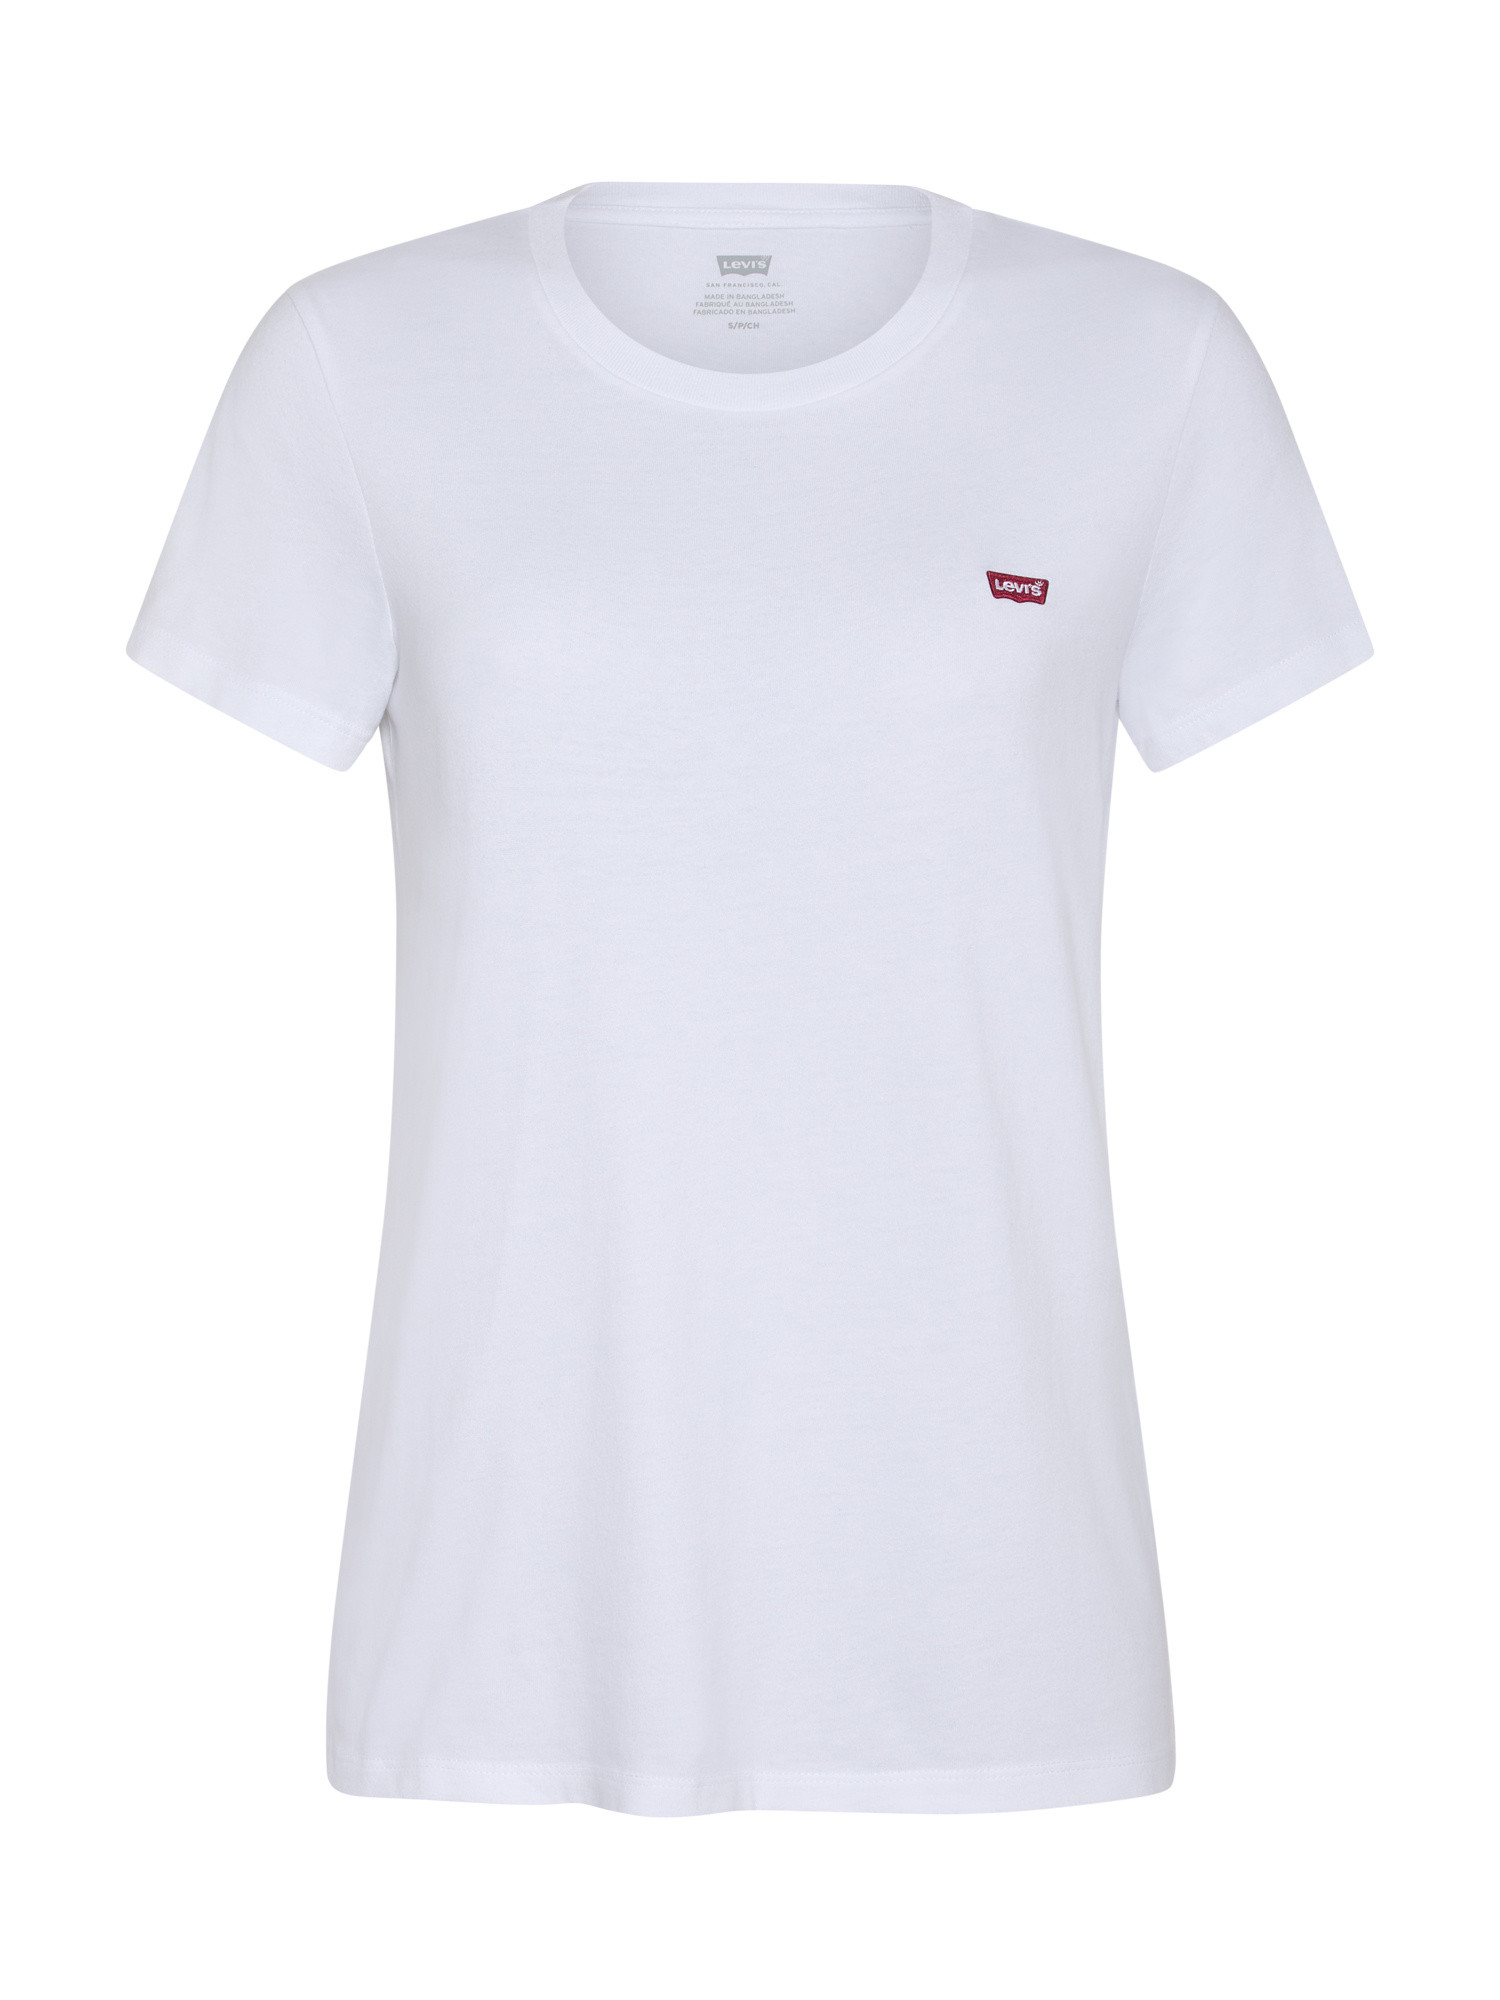 Levi's - Cotton T-shirt with logo, White, large image number 0